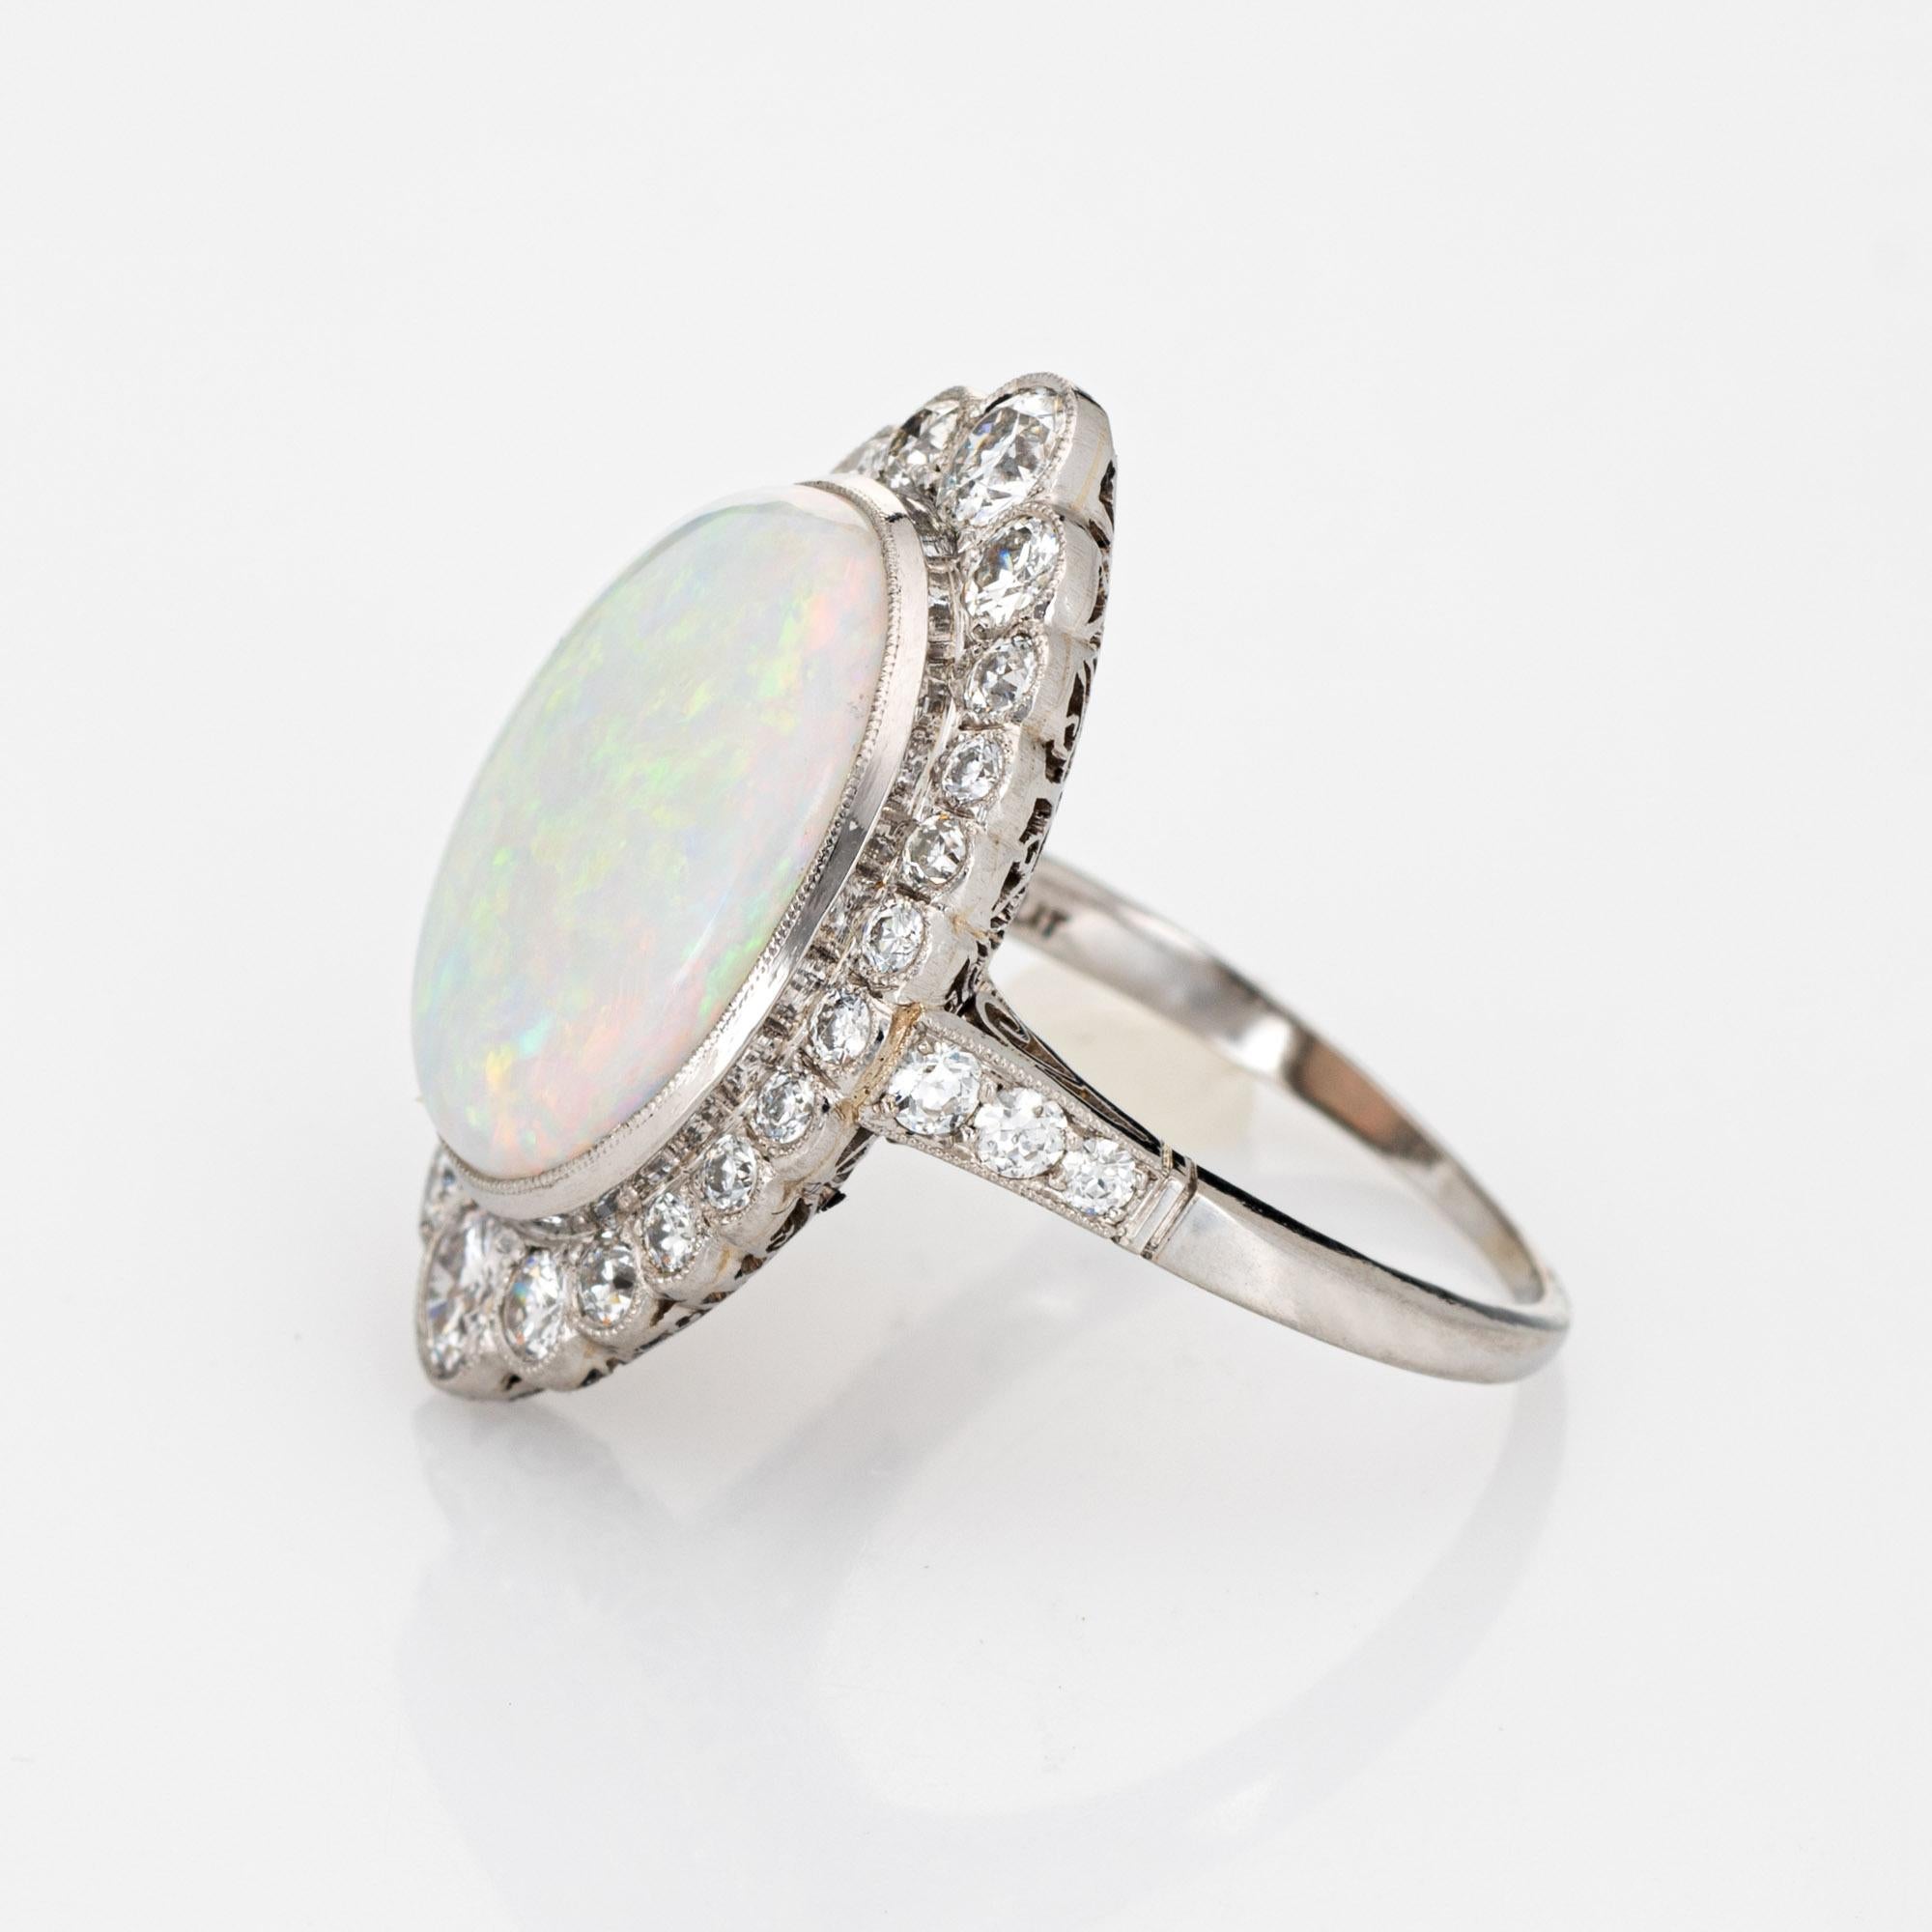 Cabochon Natural Opal Diamond Ring Platinum Vintage Large Oval Cocktail Estate Jewelry 7 For Sale